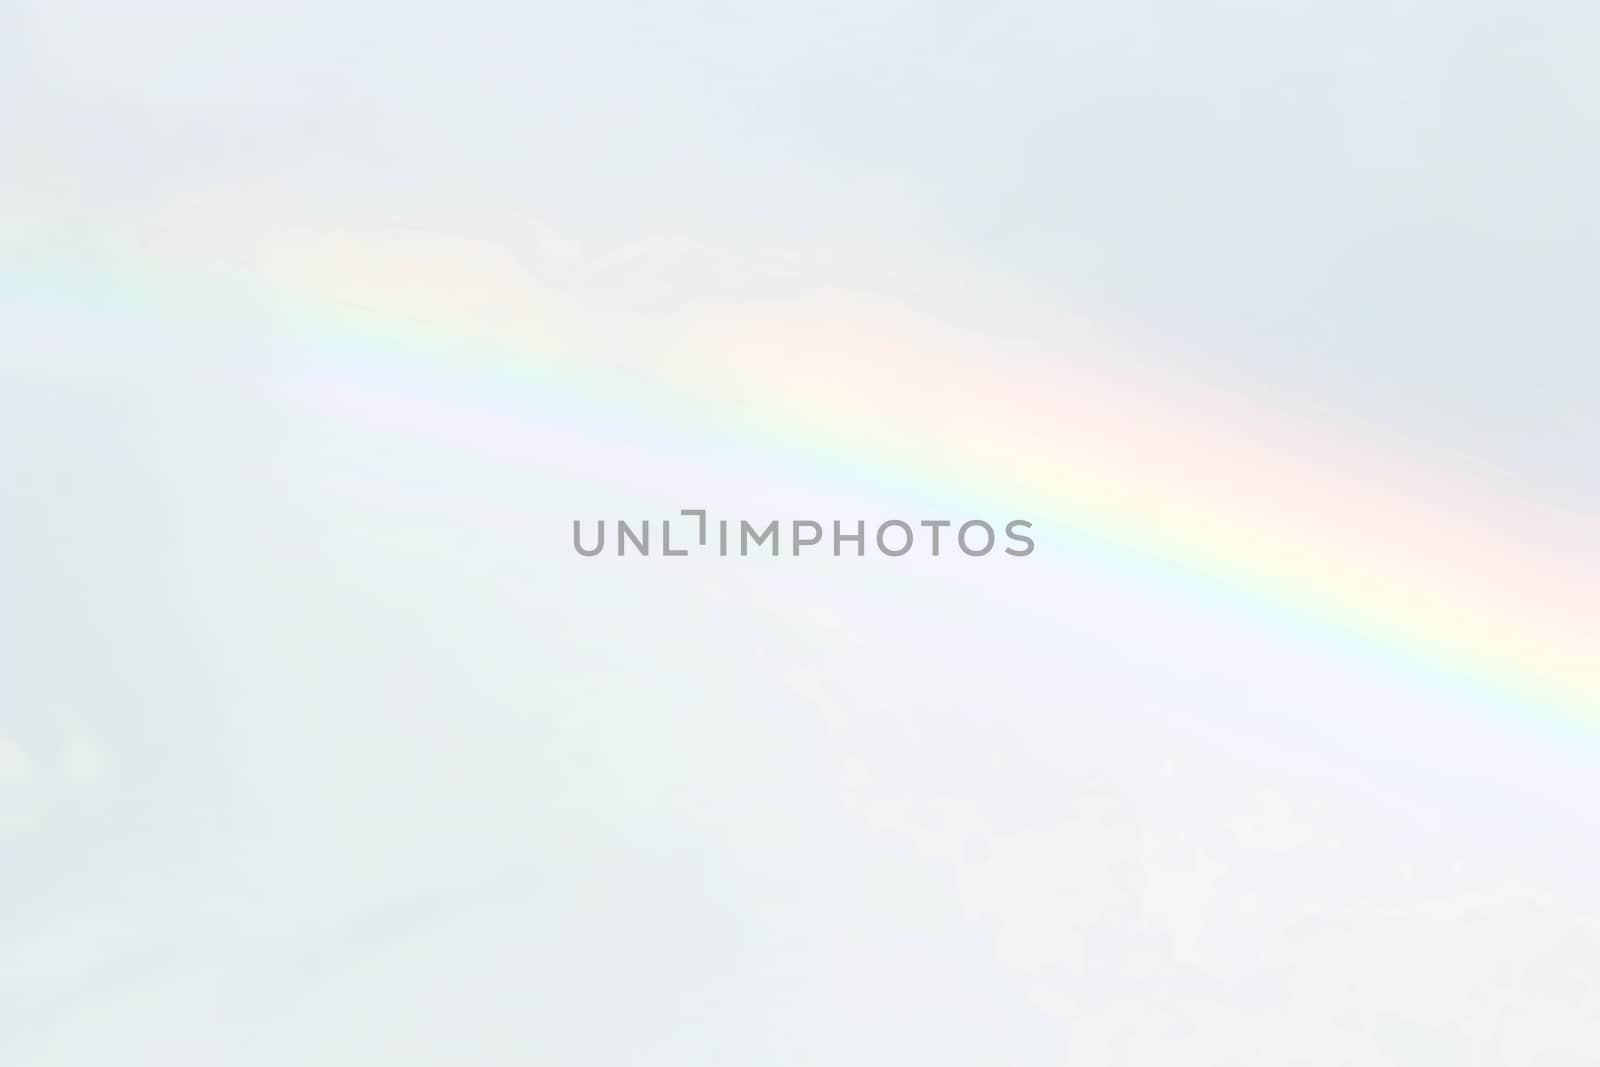 blurred sky and rainbow soft, blurred soft rainbow on sky pastel color background, nature rainbow sky wallpaper